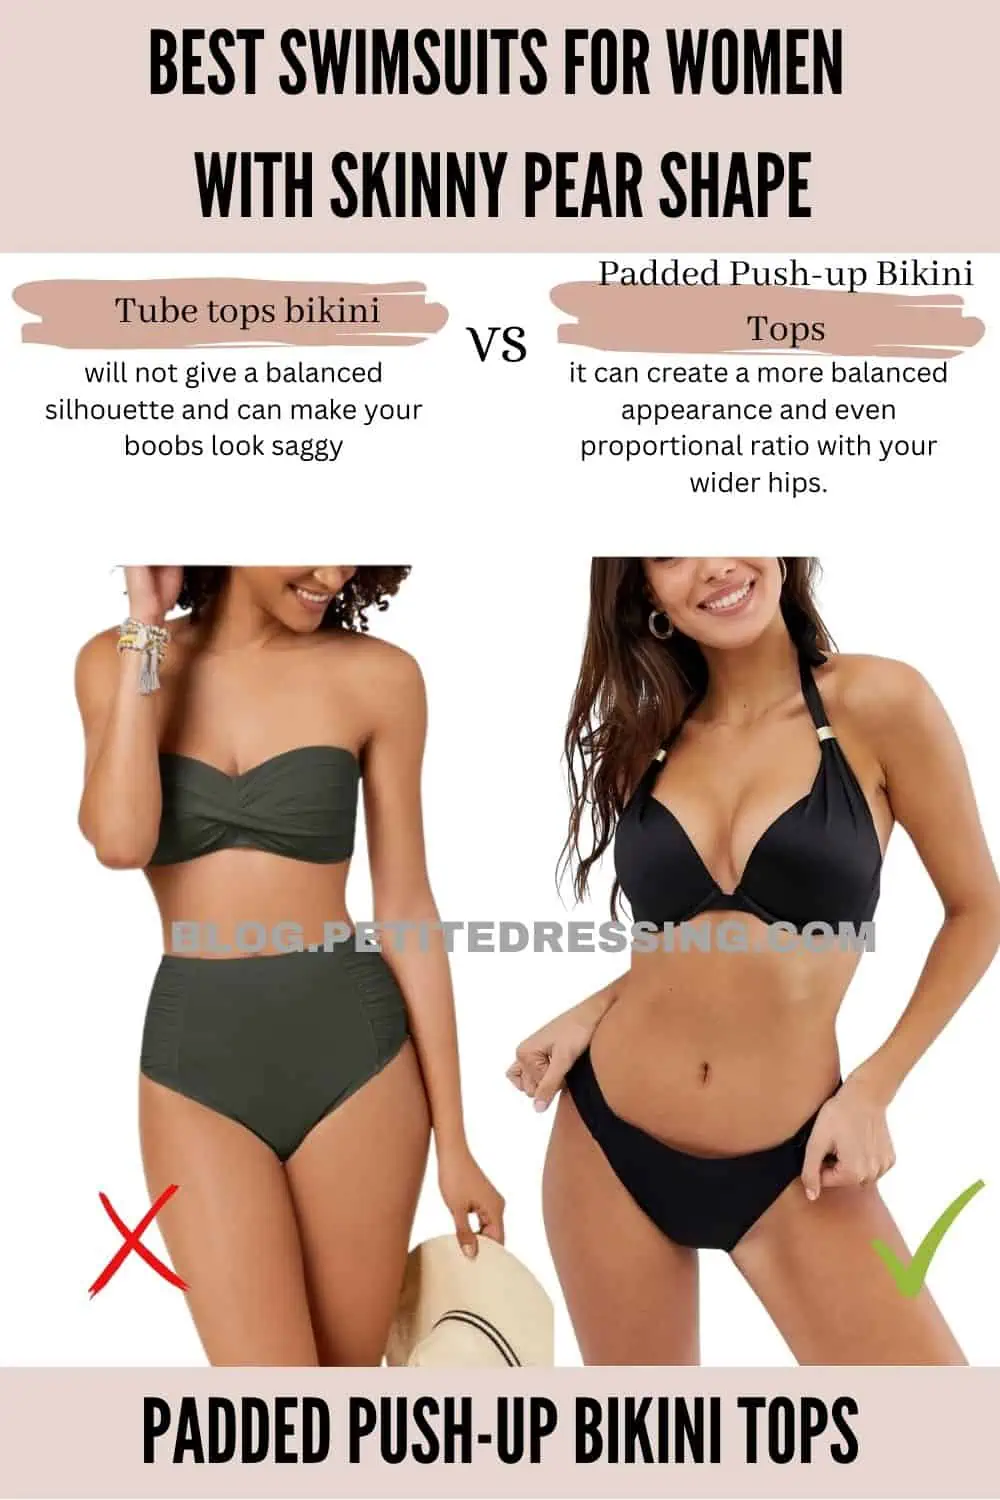 The Swimsuit Guide for women with Skinny Pear Shape - Petite Dressing